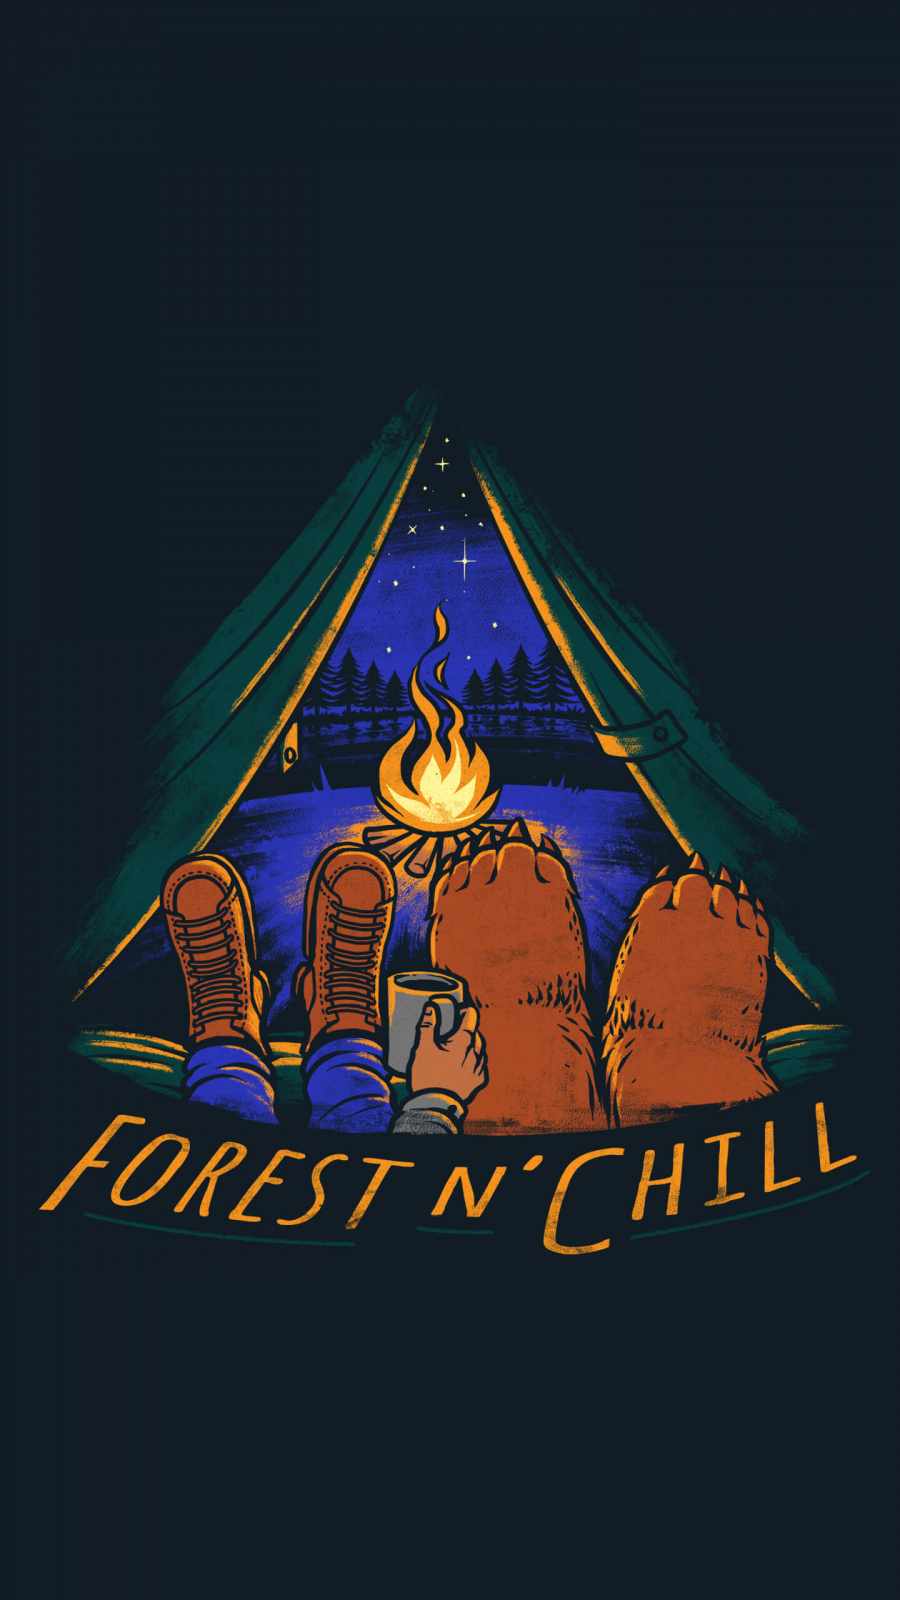 Forest and chill iPhone Wallpaper